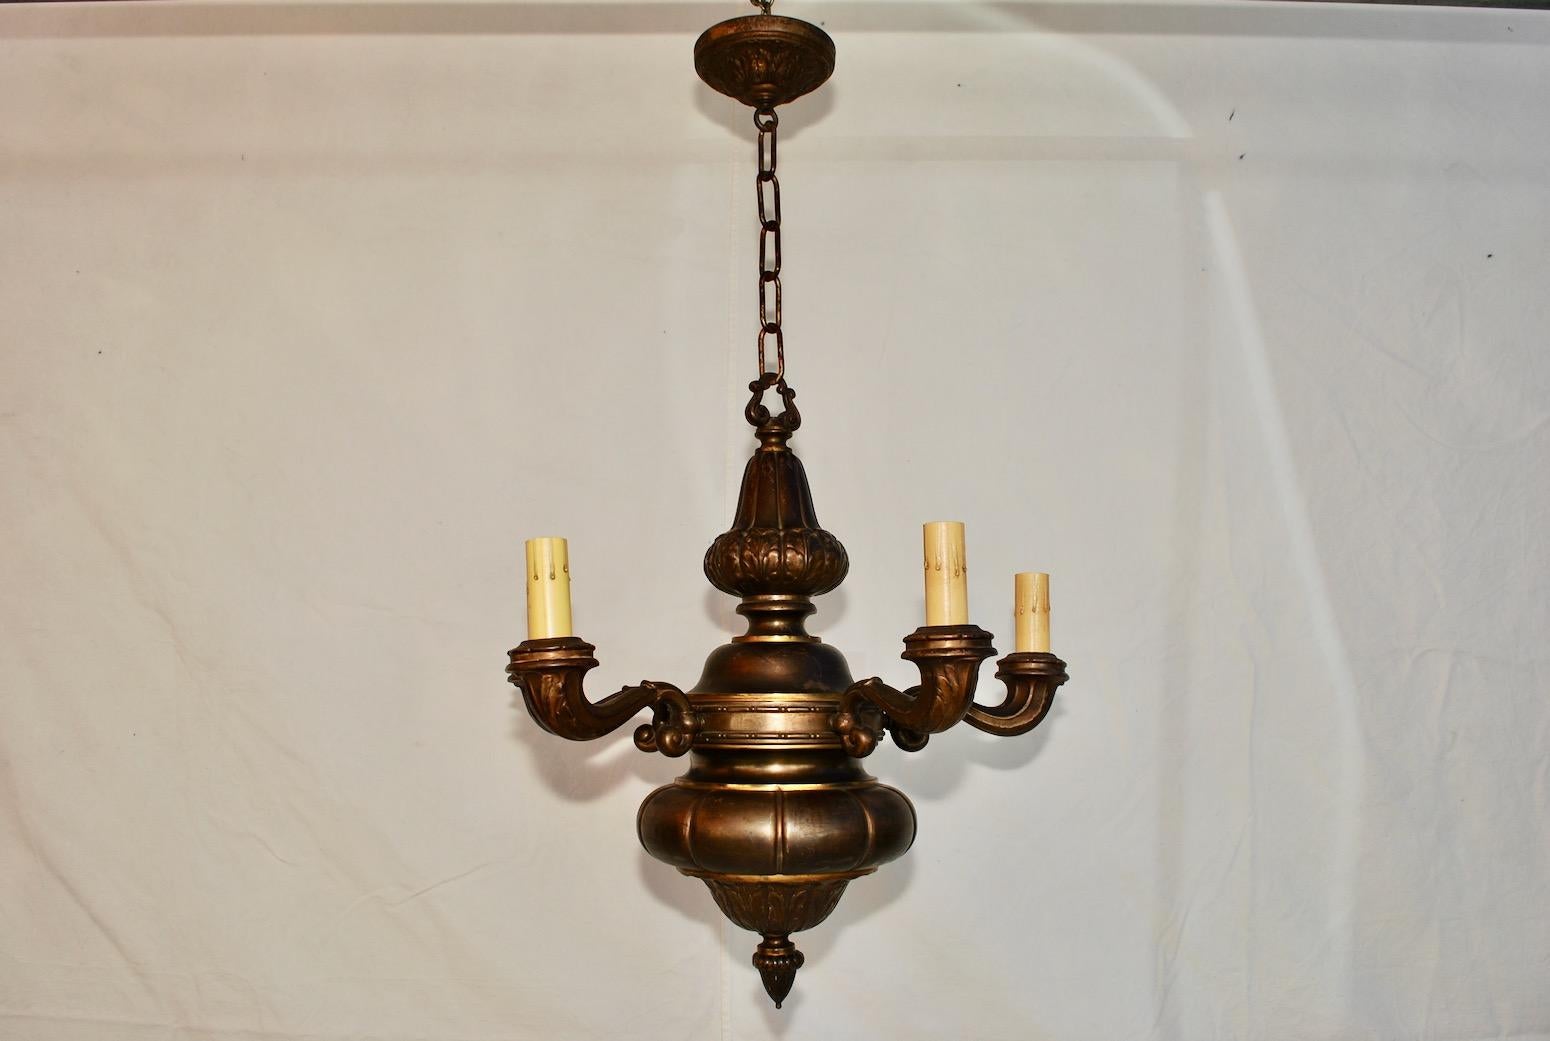 An elegant French brass chandelier, the height can be shorter, the patina is much nicer in person.

      